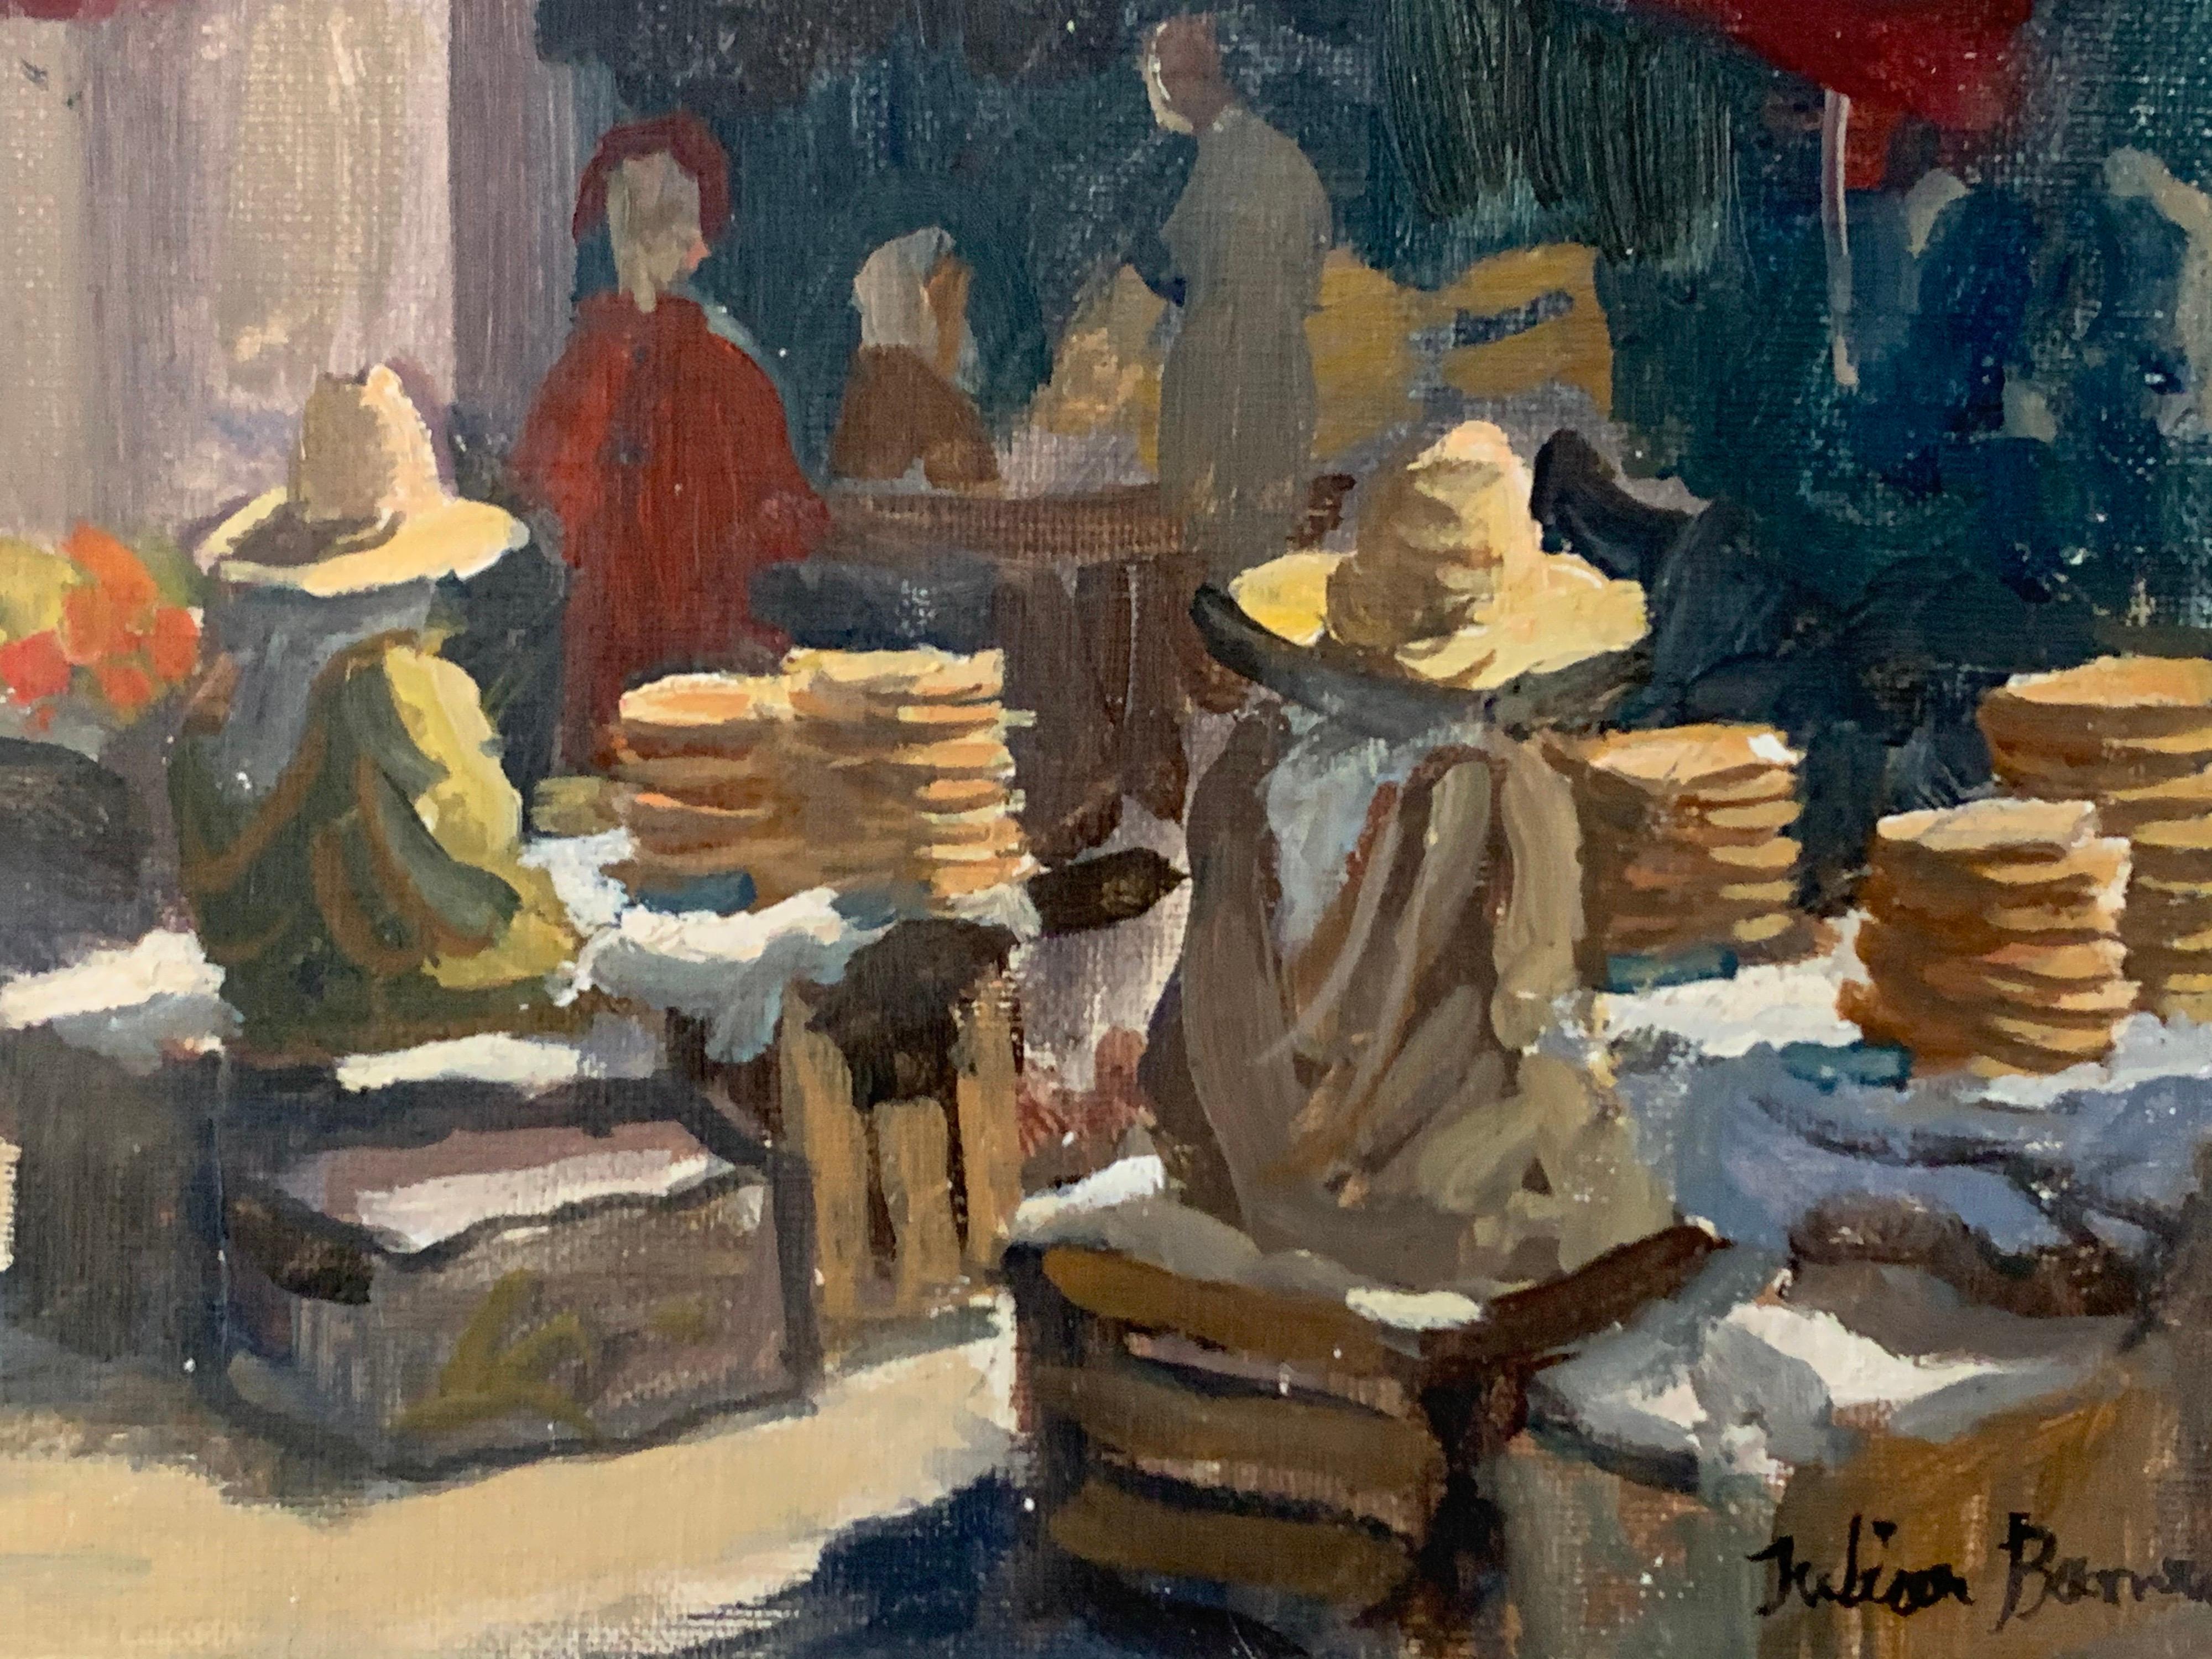 SIGNED ORIGINAL OIL - NORTH AFRICAN BUSY MARKET SCENE - Brown Figurative Painting by Julian Barrow